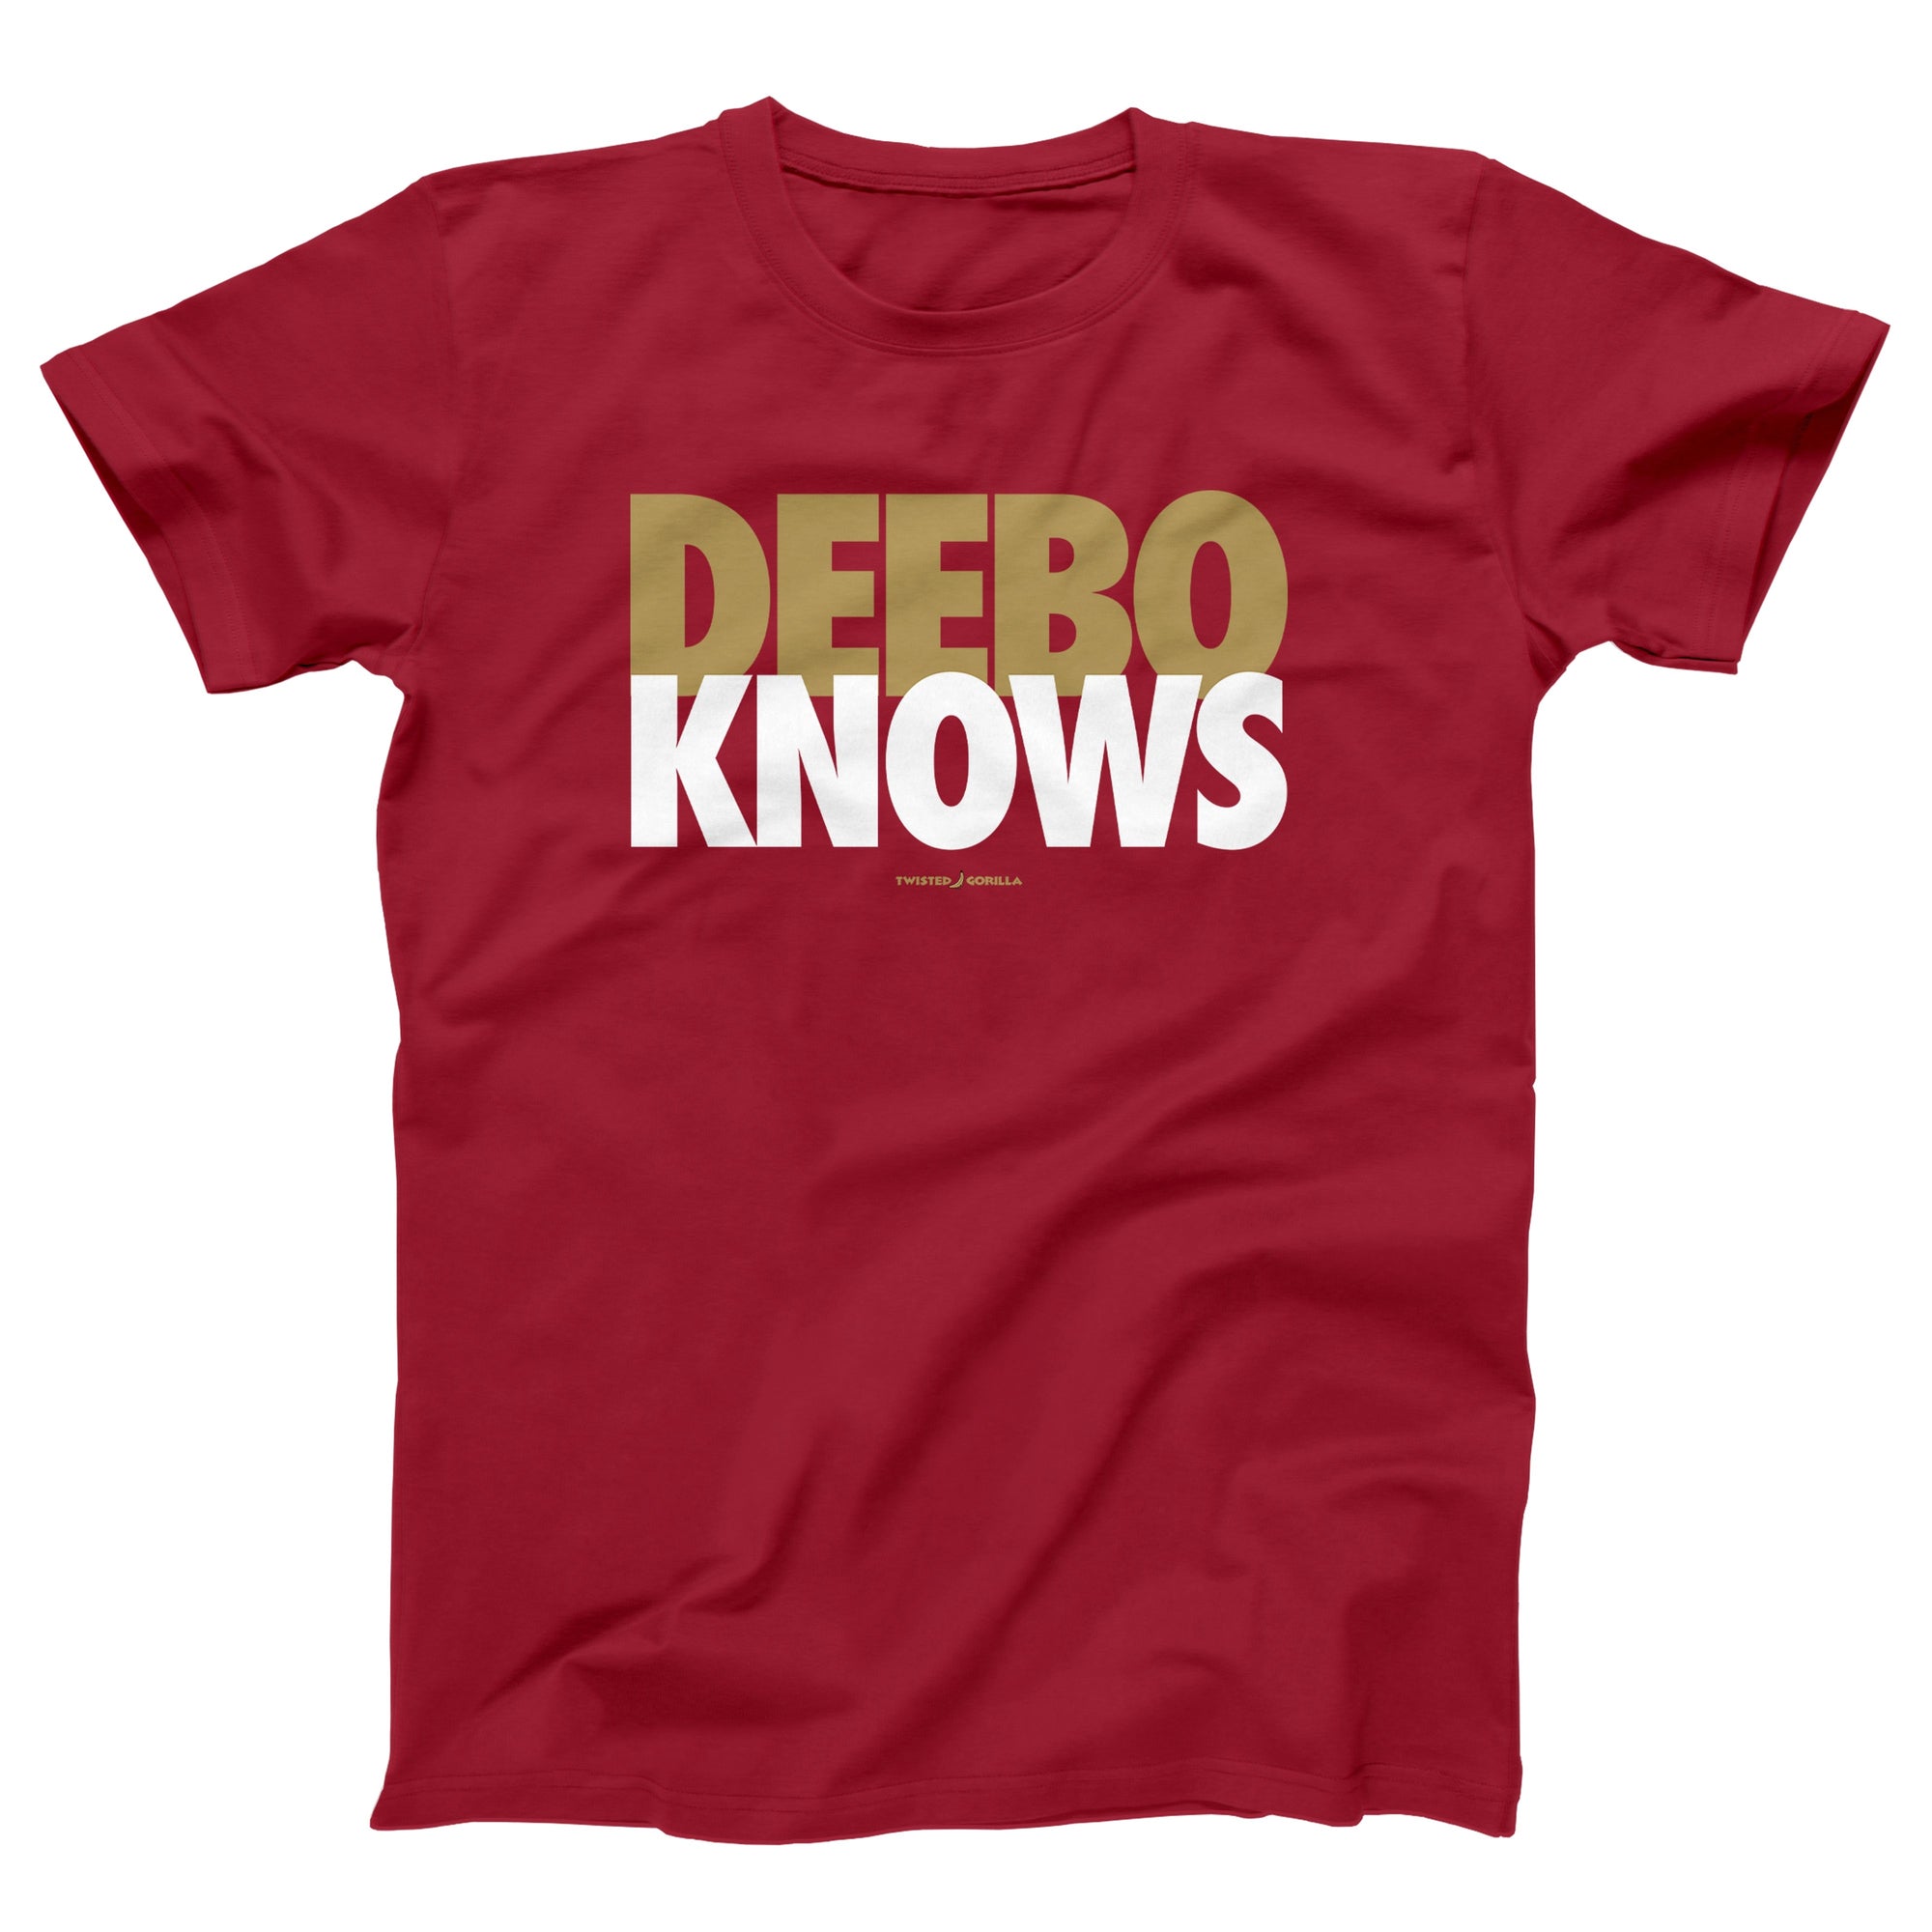 Deebo Knows Adult Unisex T-Shirt - Twisted Gorilla